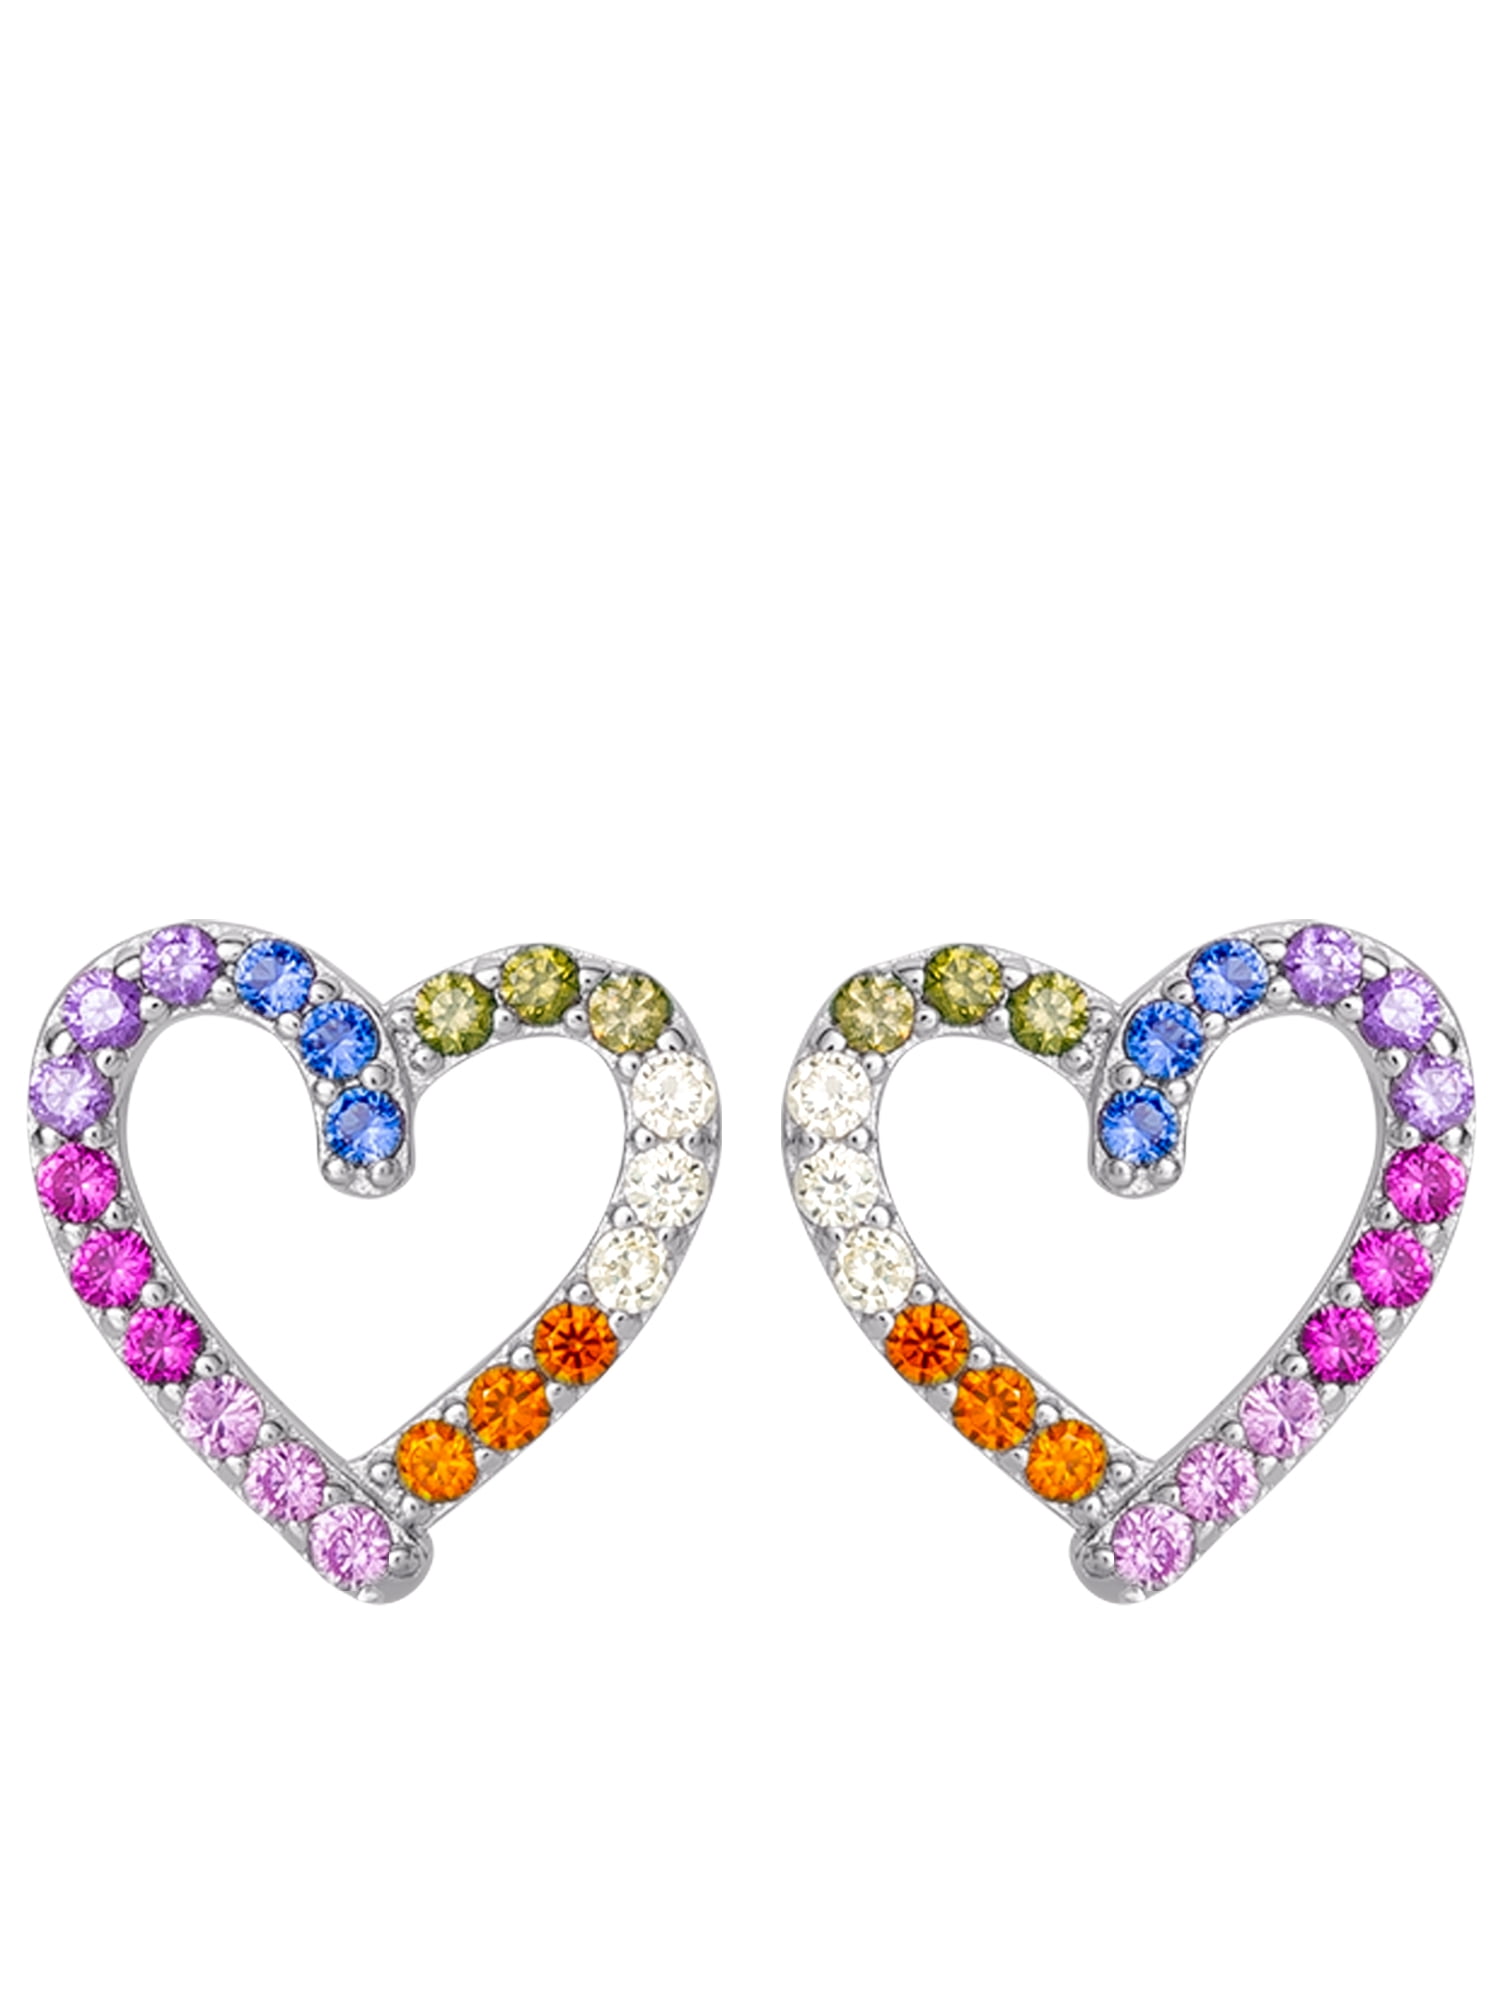 Graduated Stones Cubic Zirconia Open Heart Stud Earrings Rhodium Plated Sterling Silver